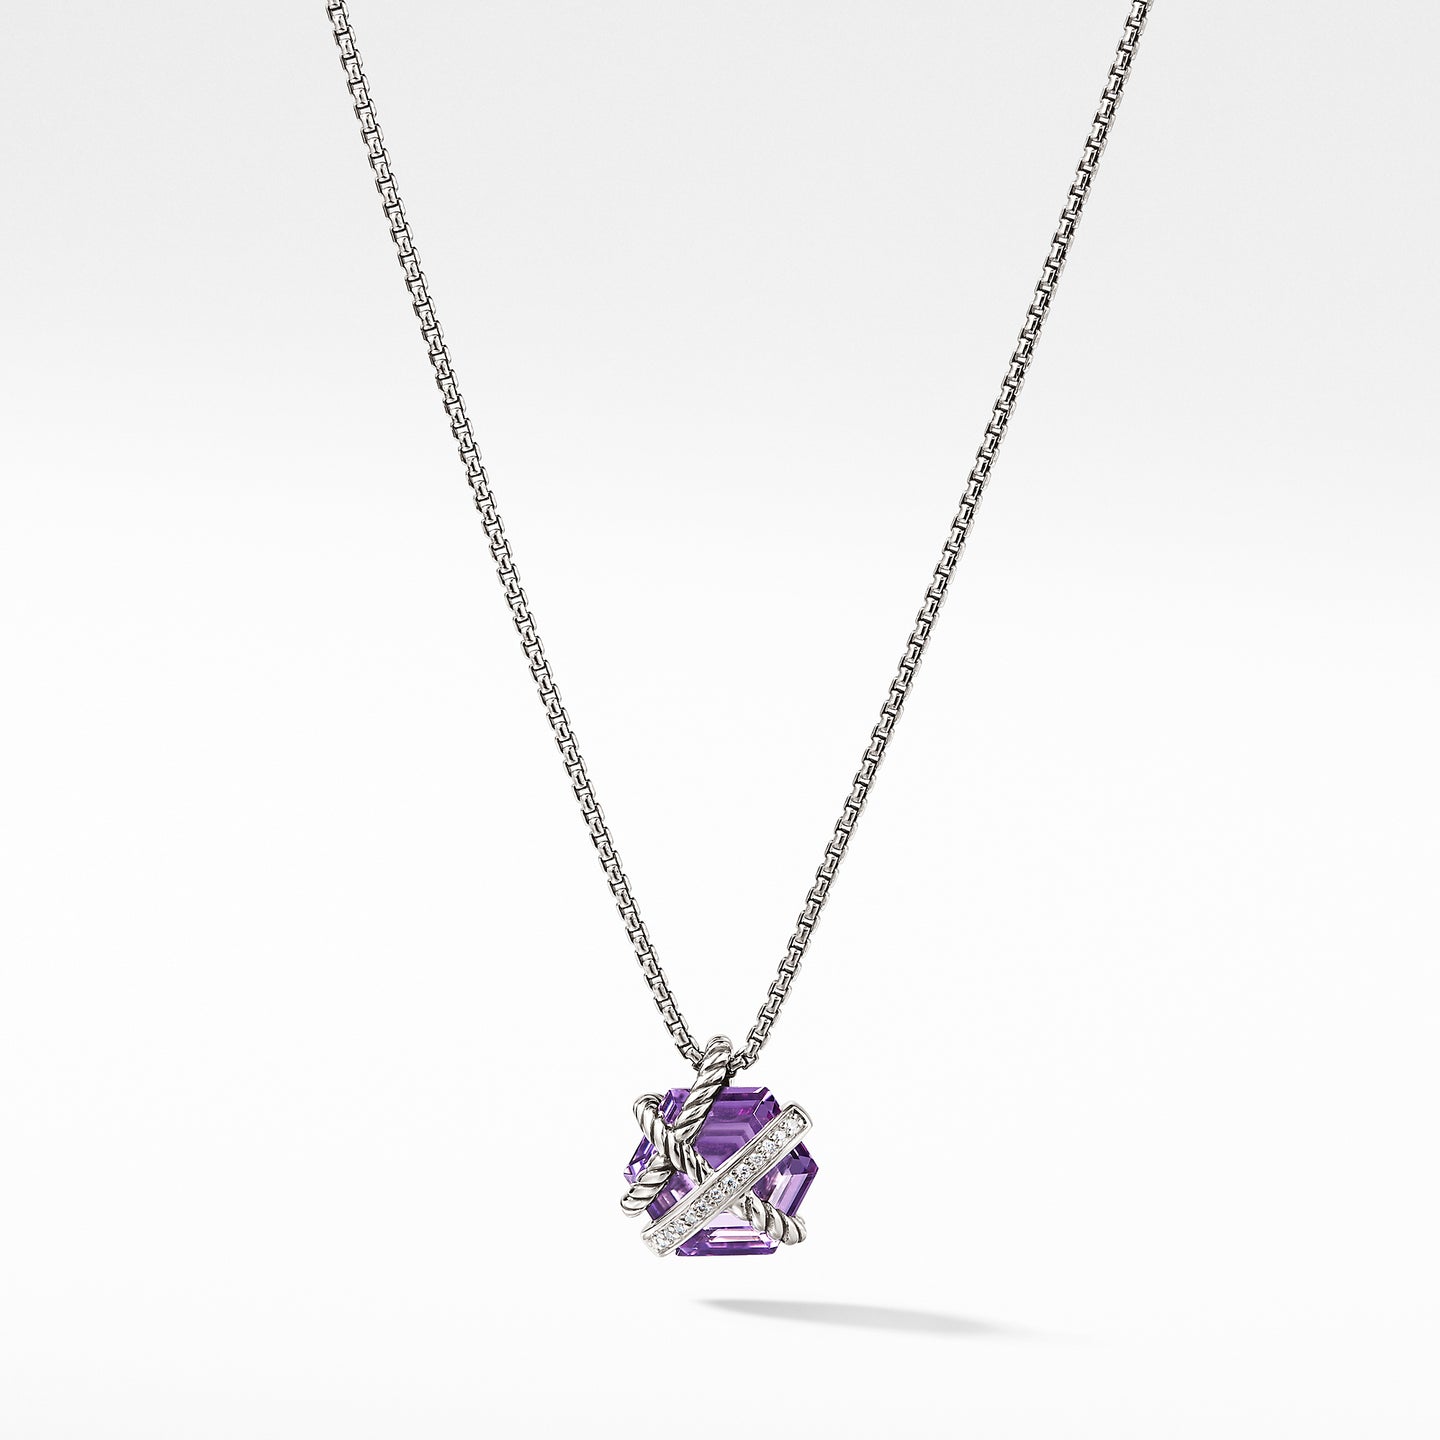 Necklace with Amethyst and Diamonds, 17